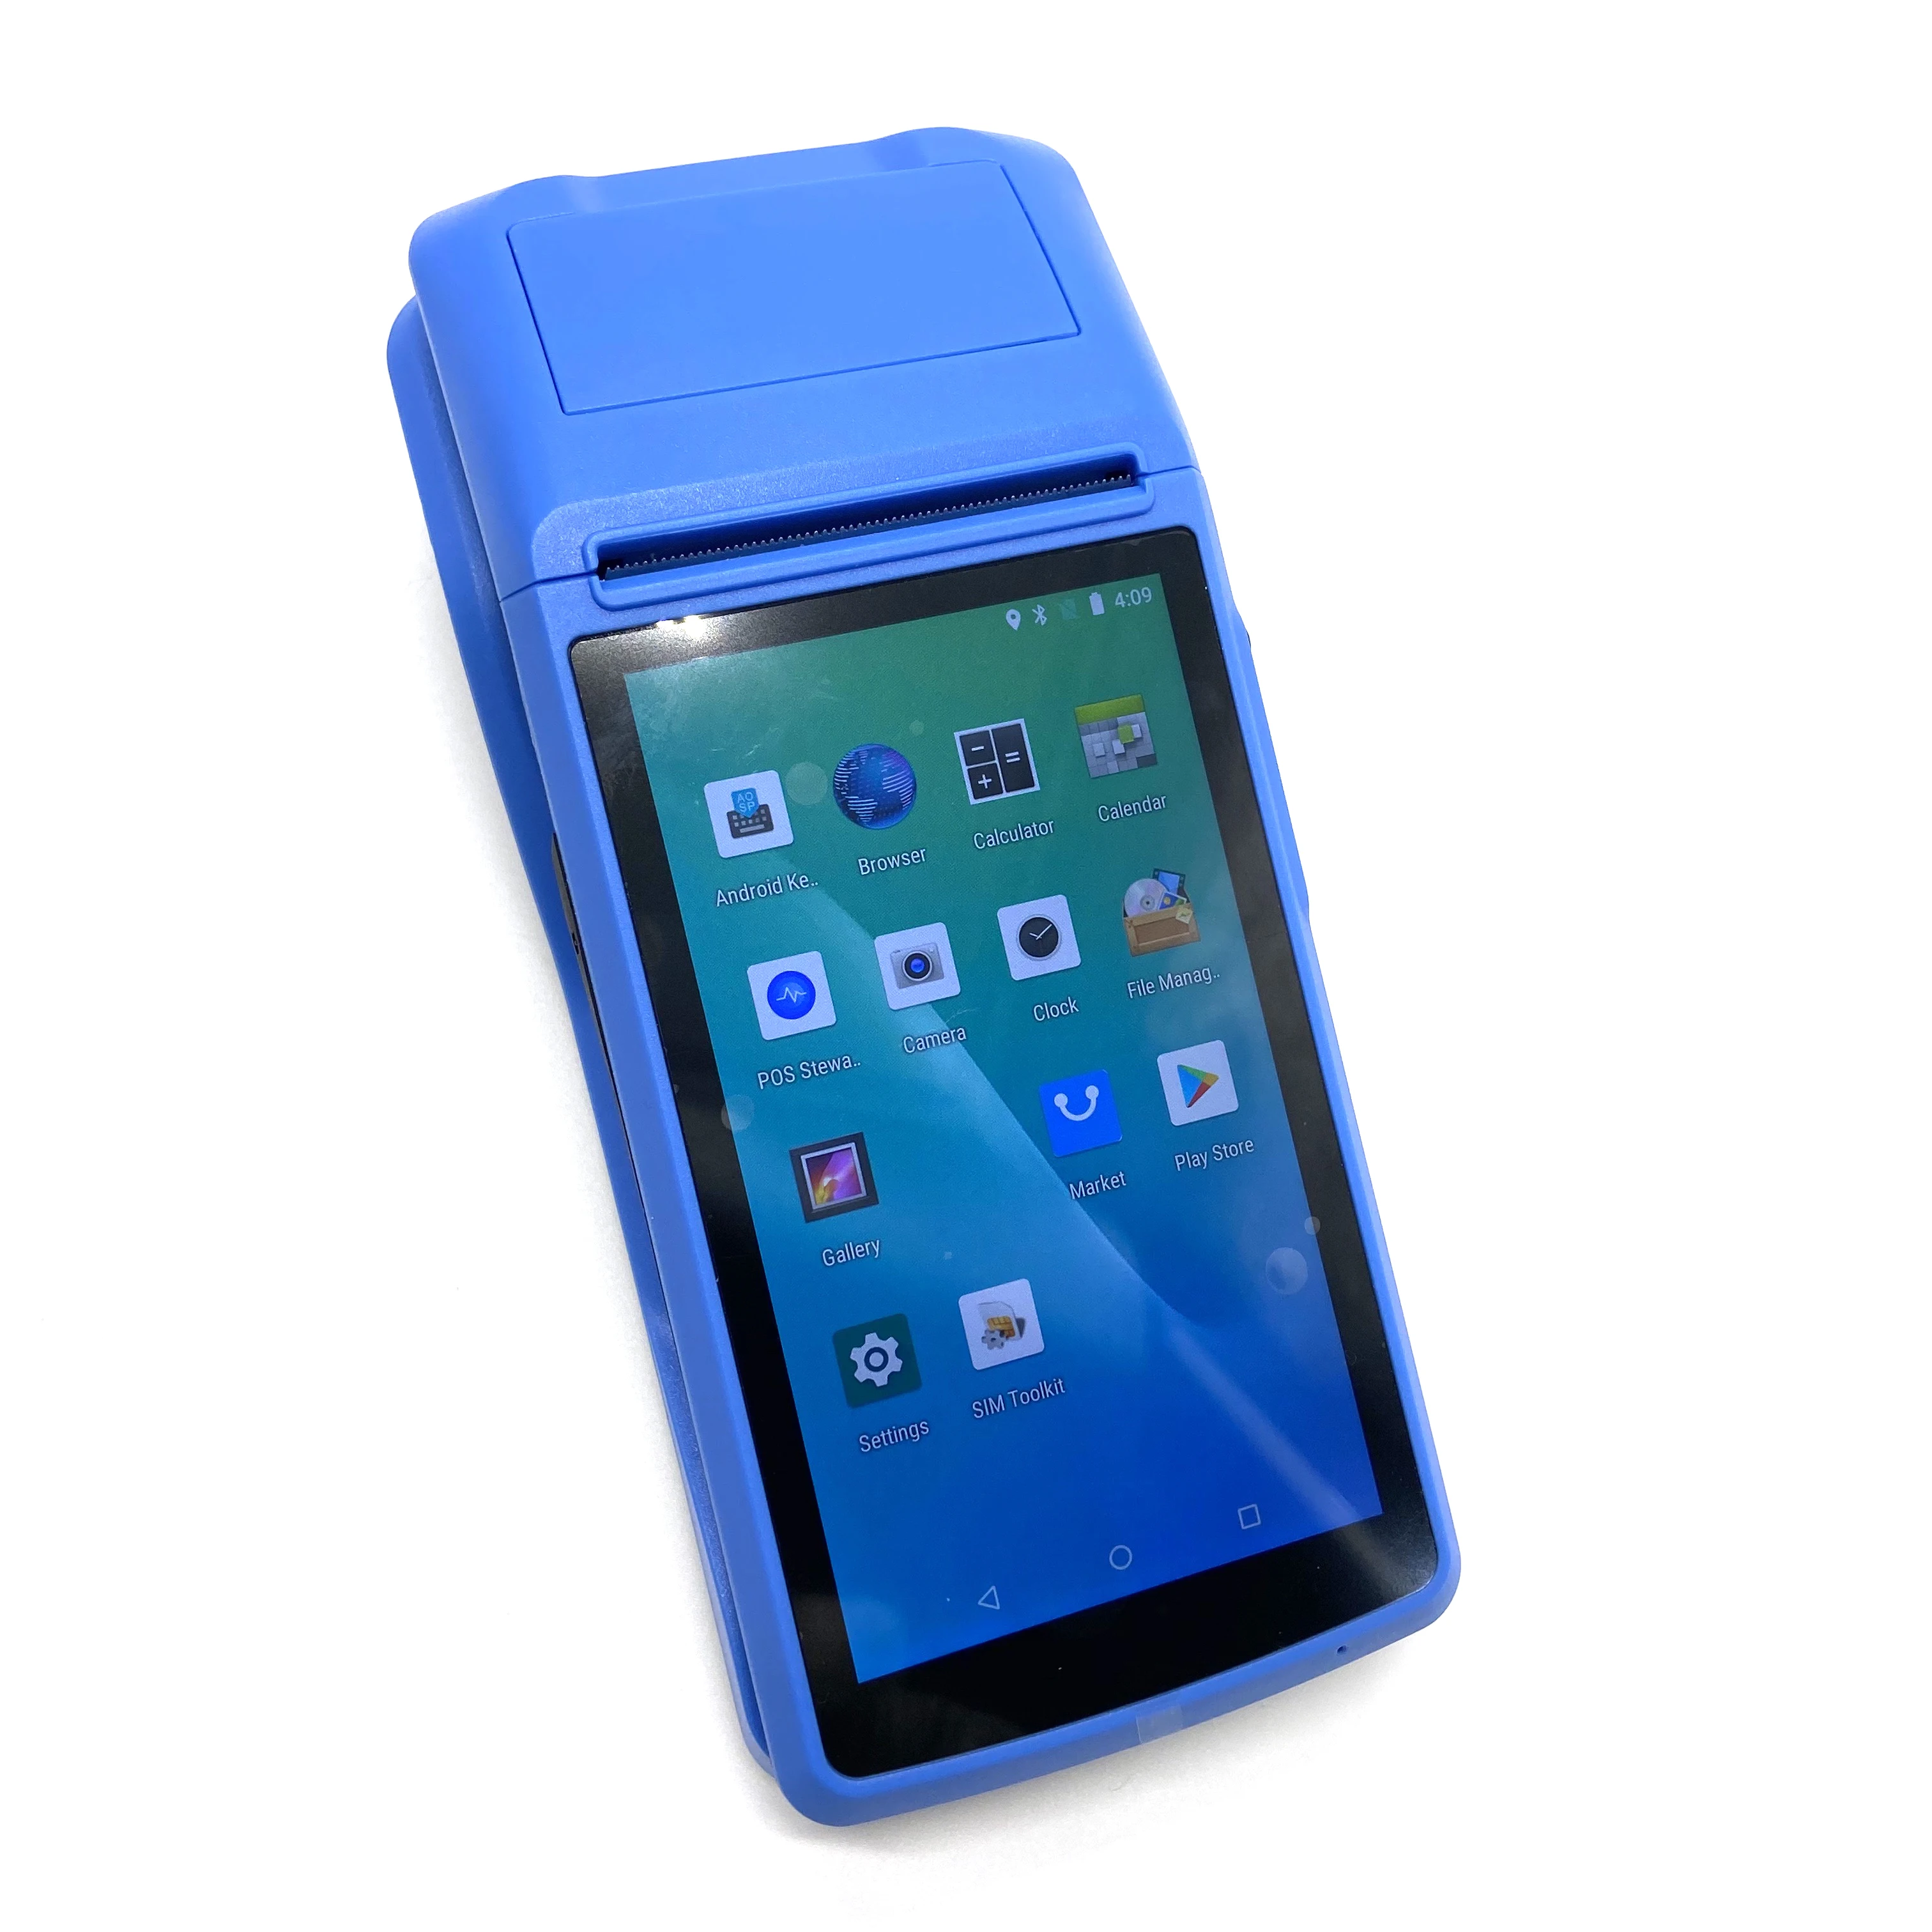 

High Quality Android Handheld POS Terminal with Printer Barcode Scanner PDA